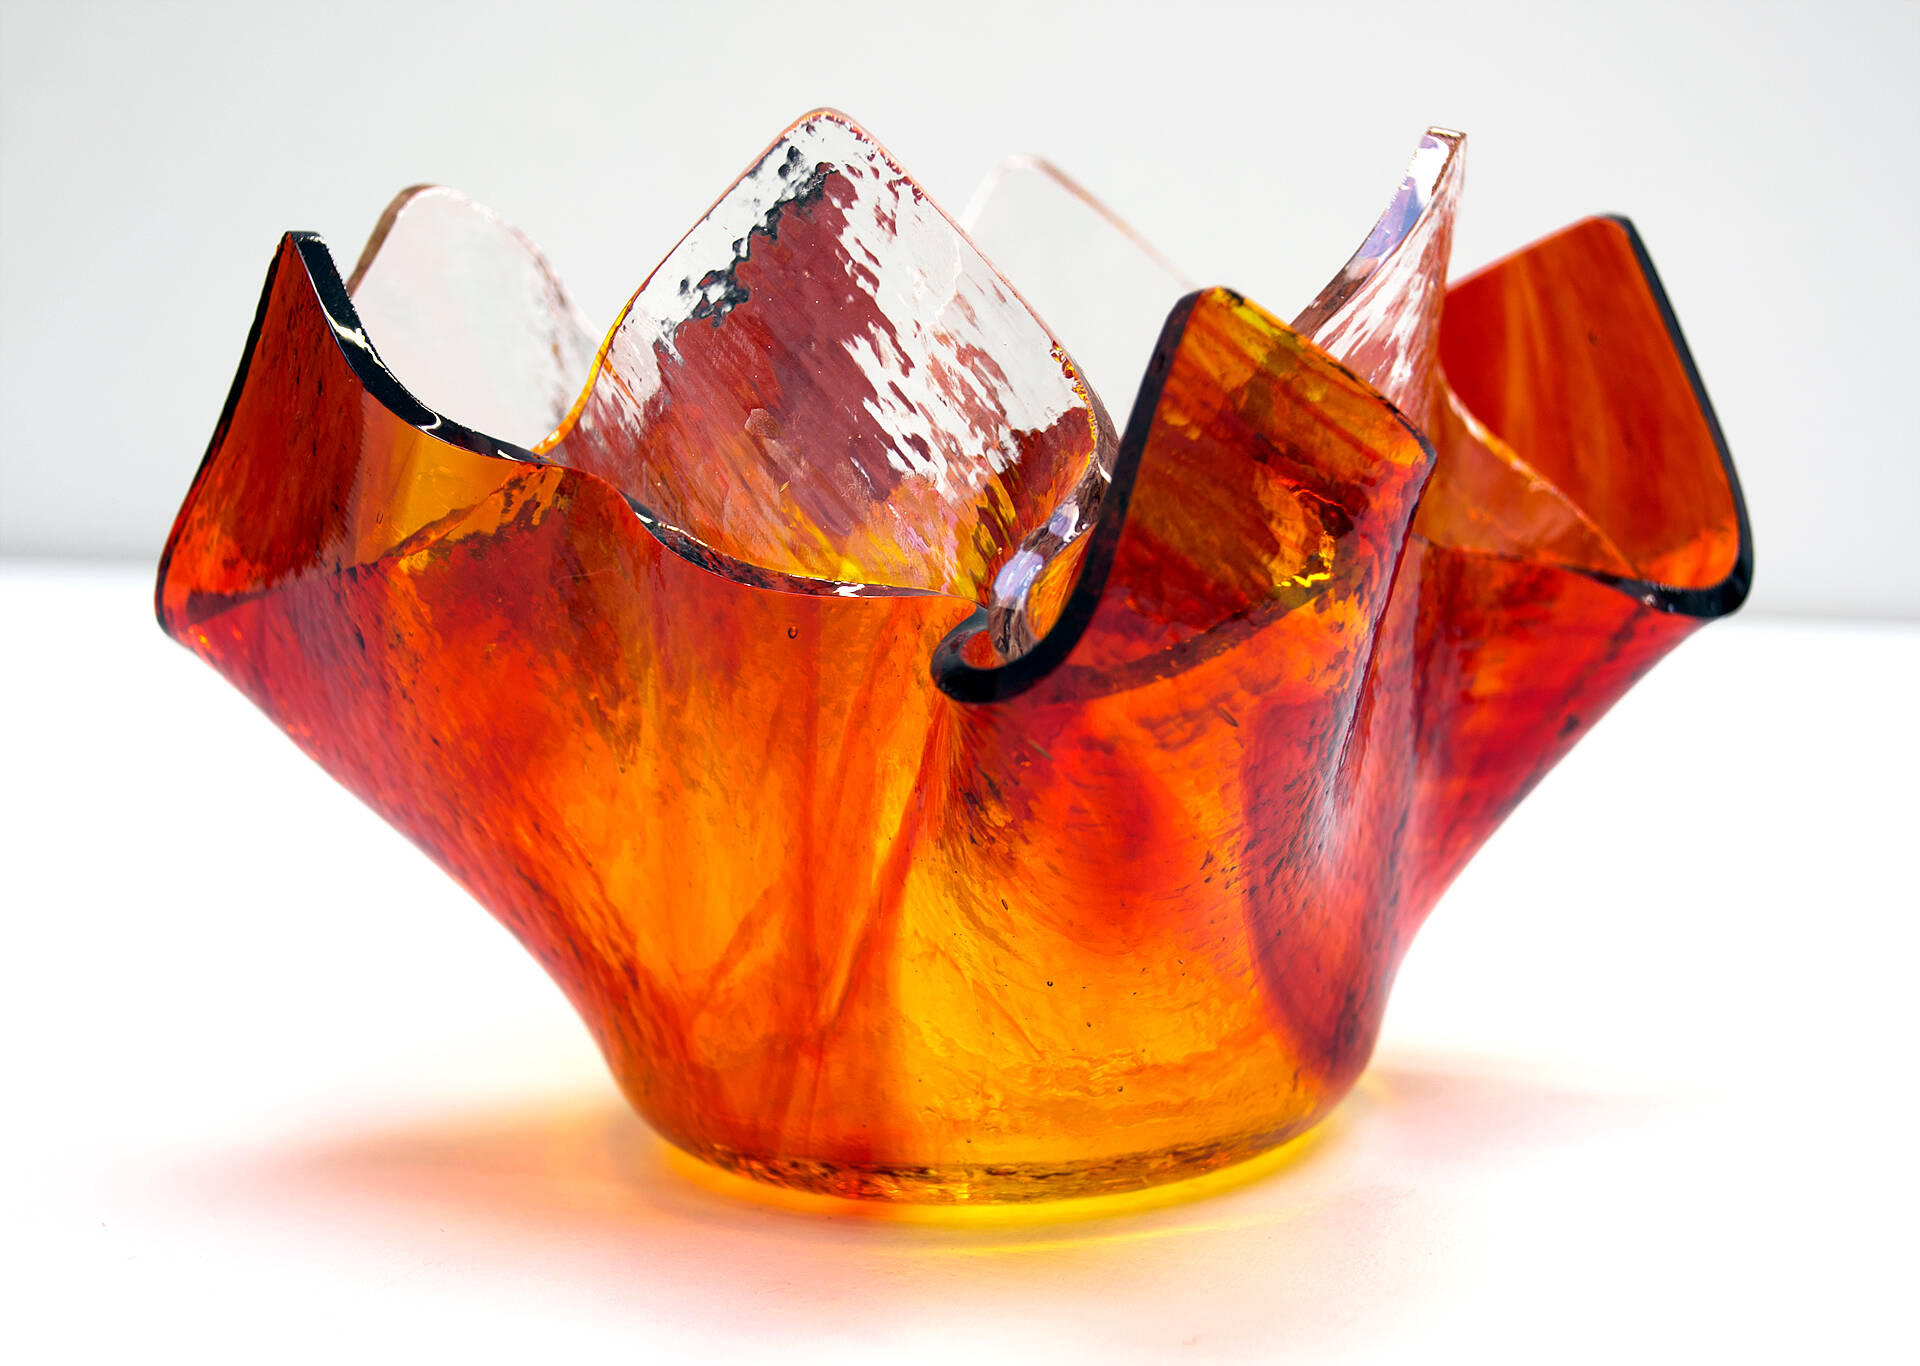 Dixie Armfield’s creations are of fused glass.